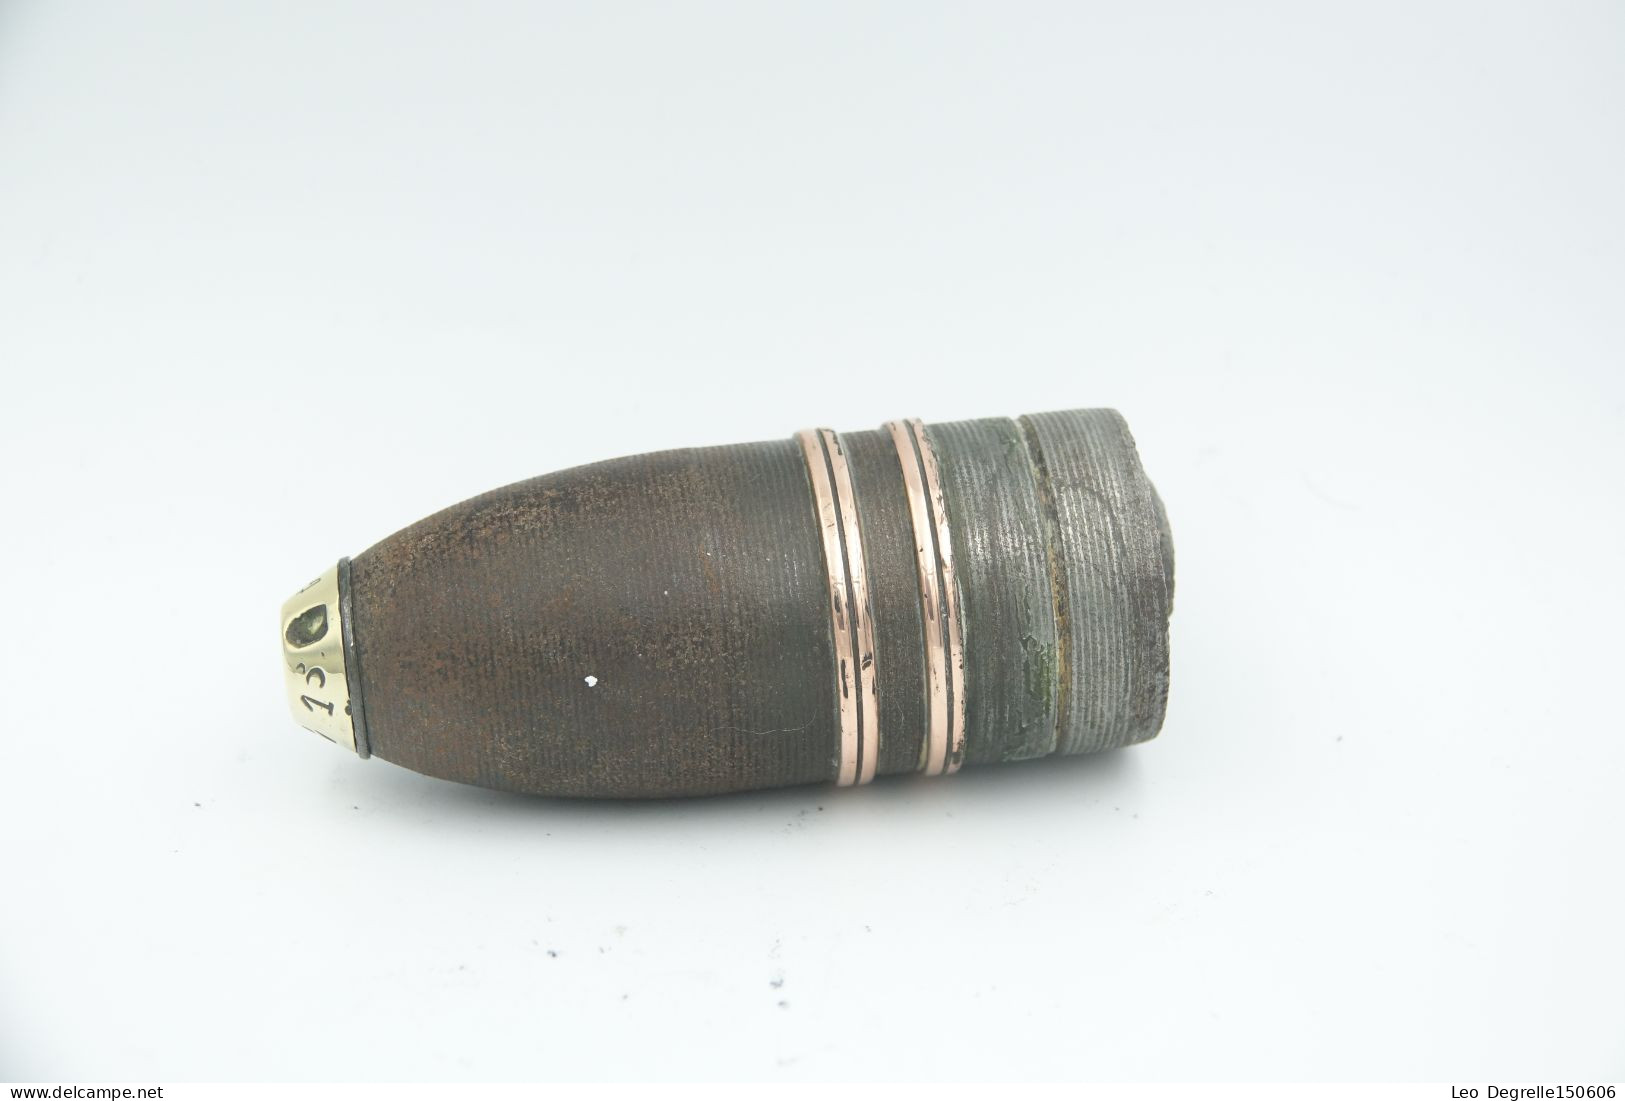 Militaria - Ammunition : Original French Model 1888 37MM High Explosive - WW1 1916 - Weapon Deactivated Shell - L = 17 - Decorative Weapons